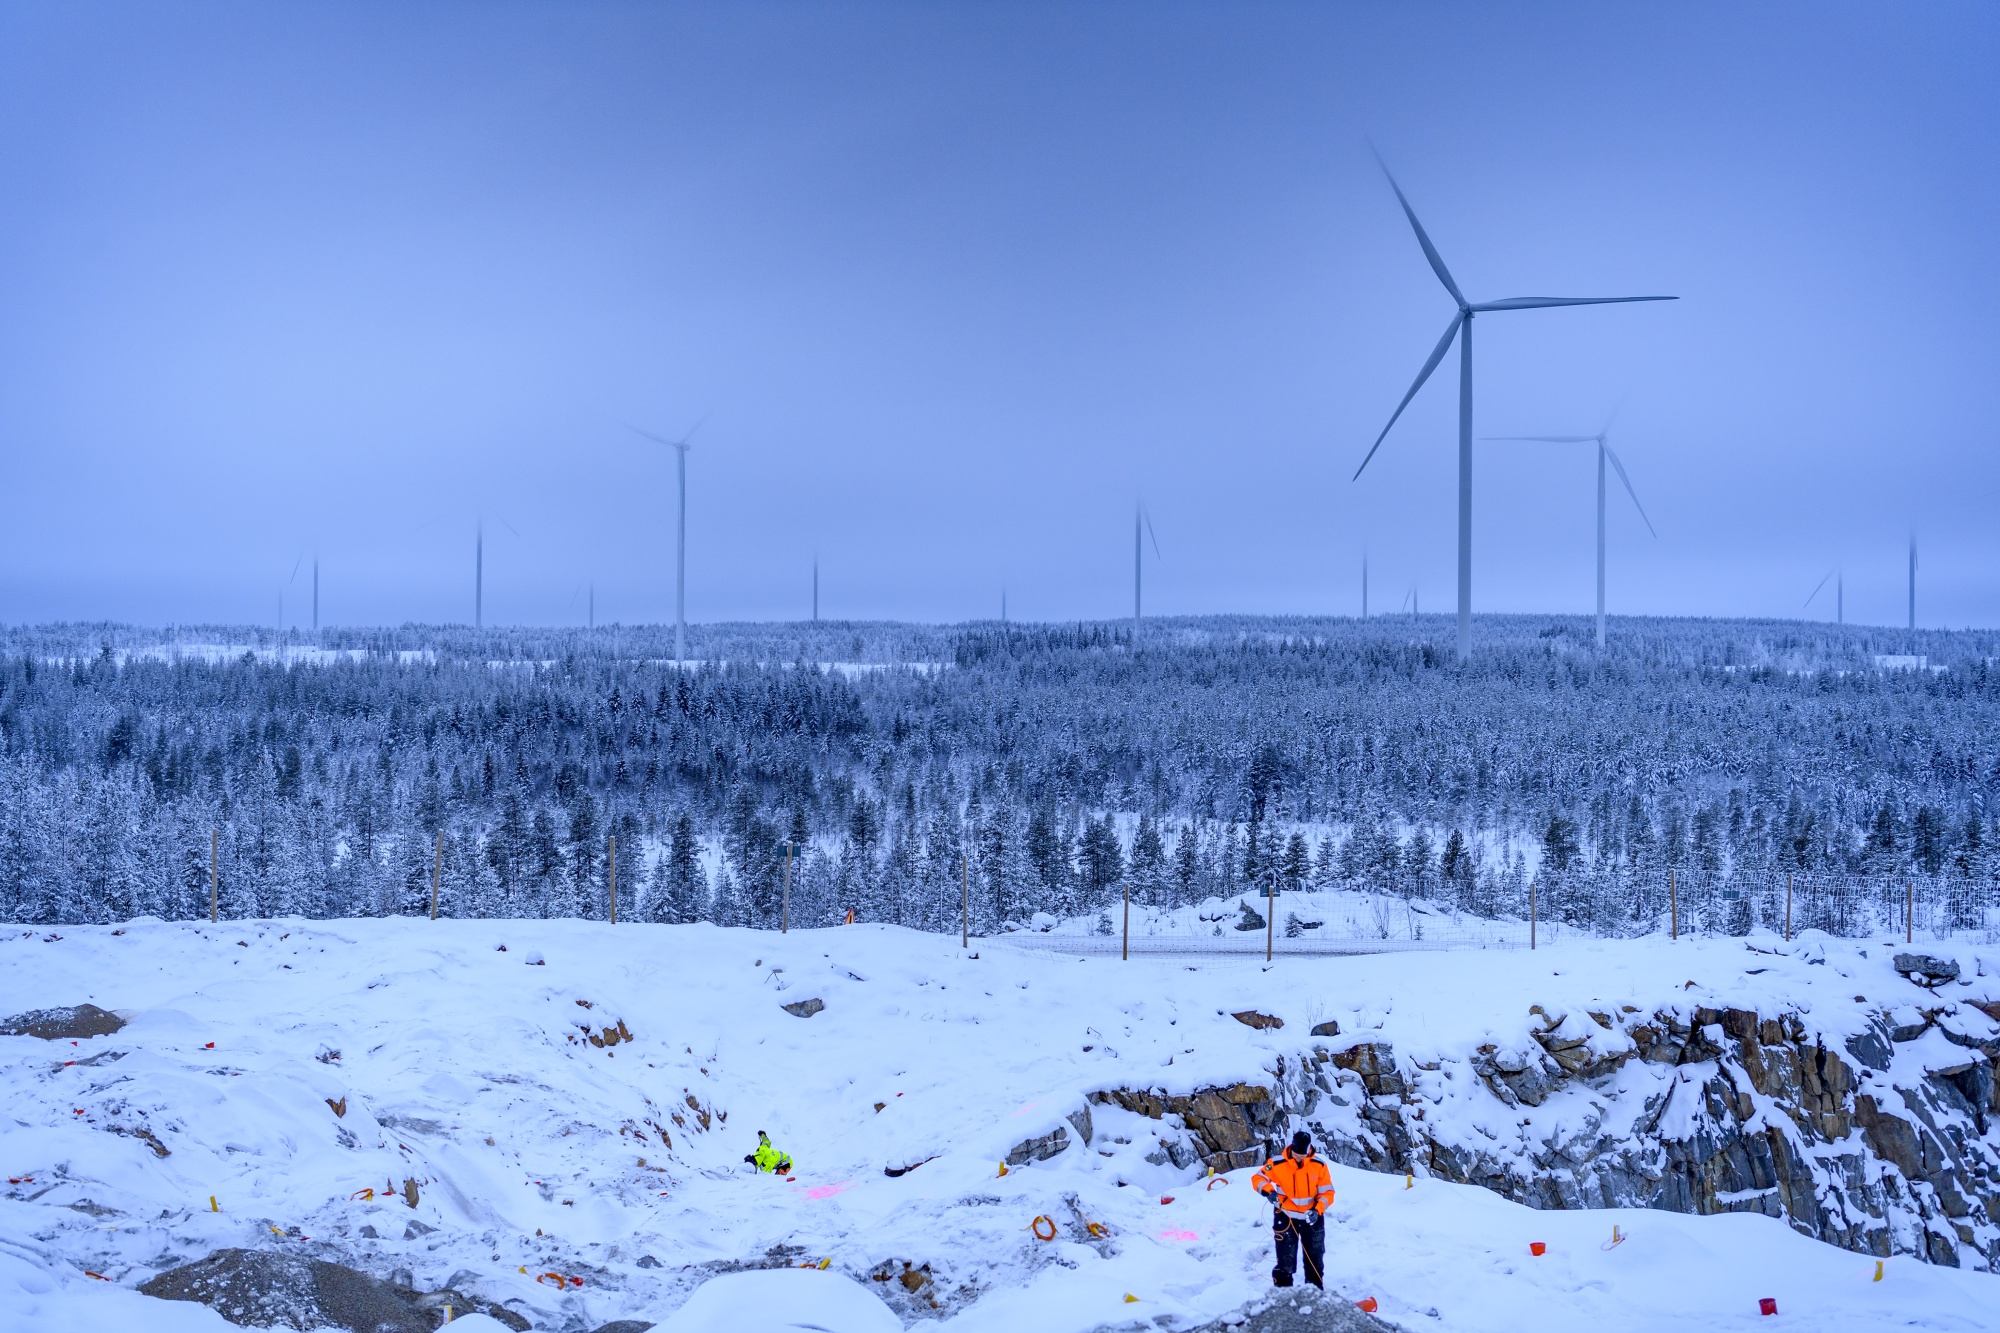 Workers prepare the ground for development work at a wind park project near Pitea, Sweden.